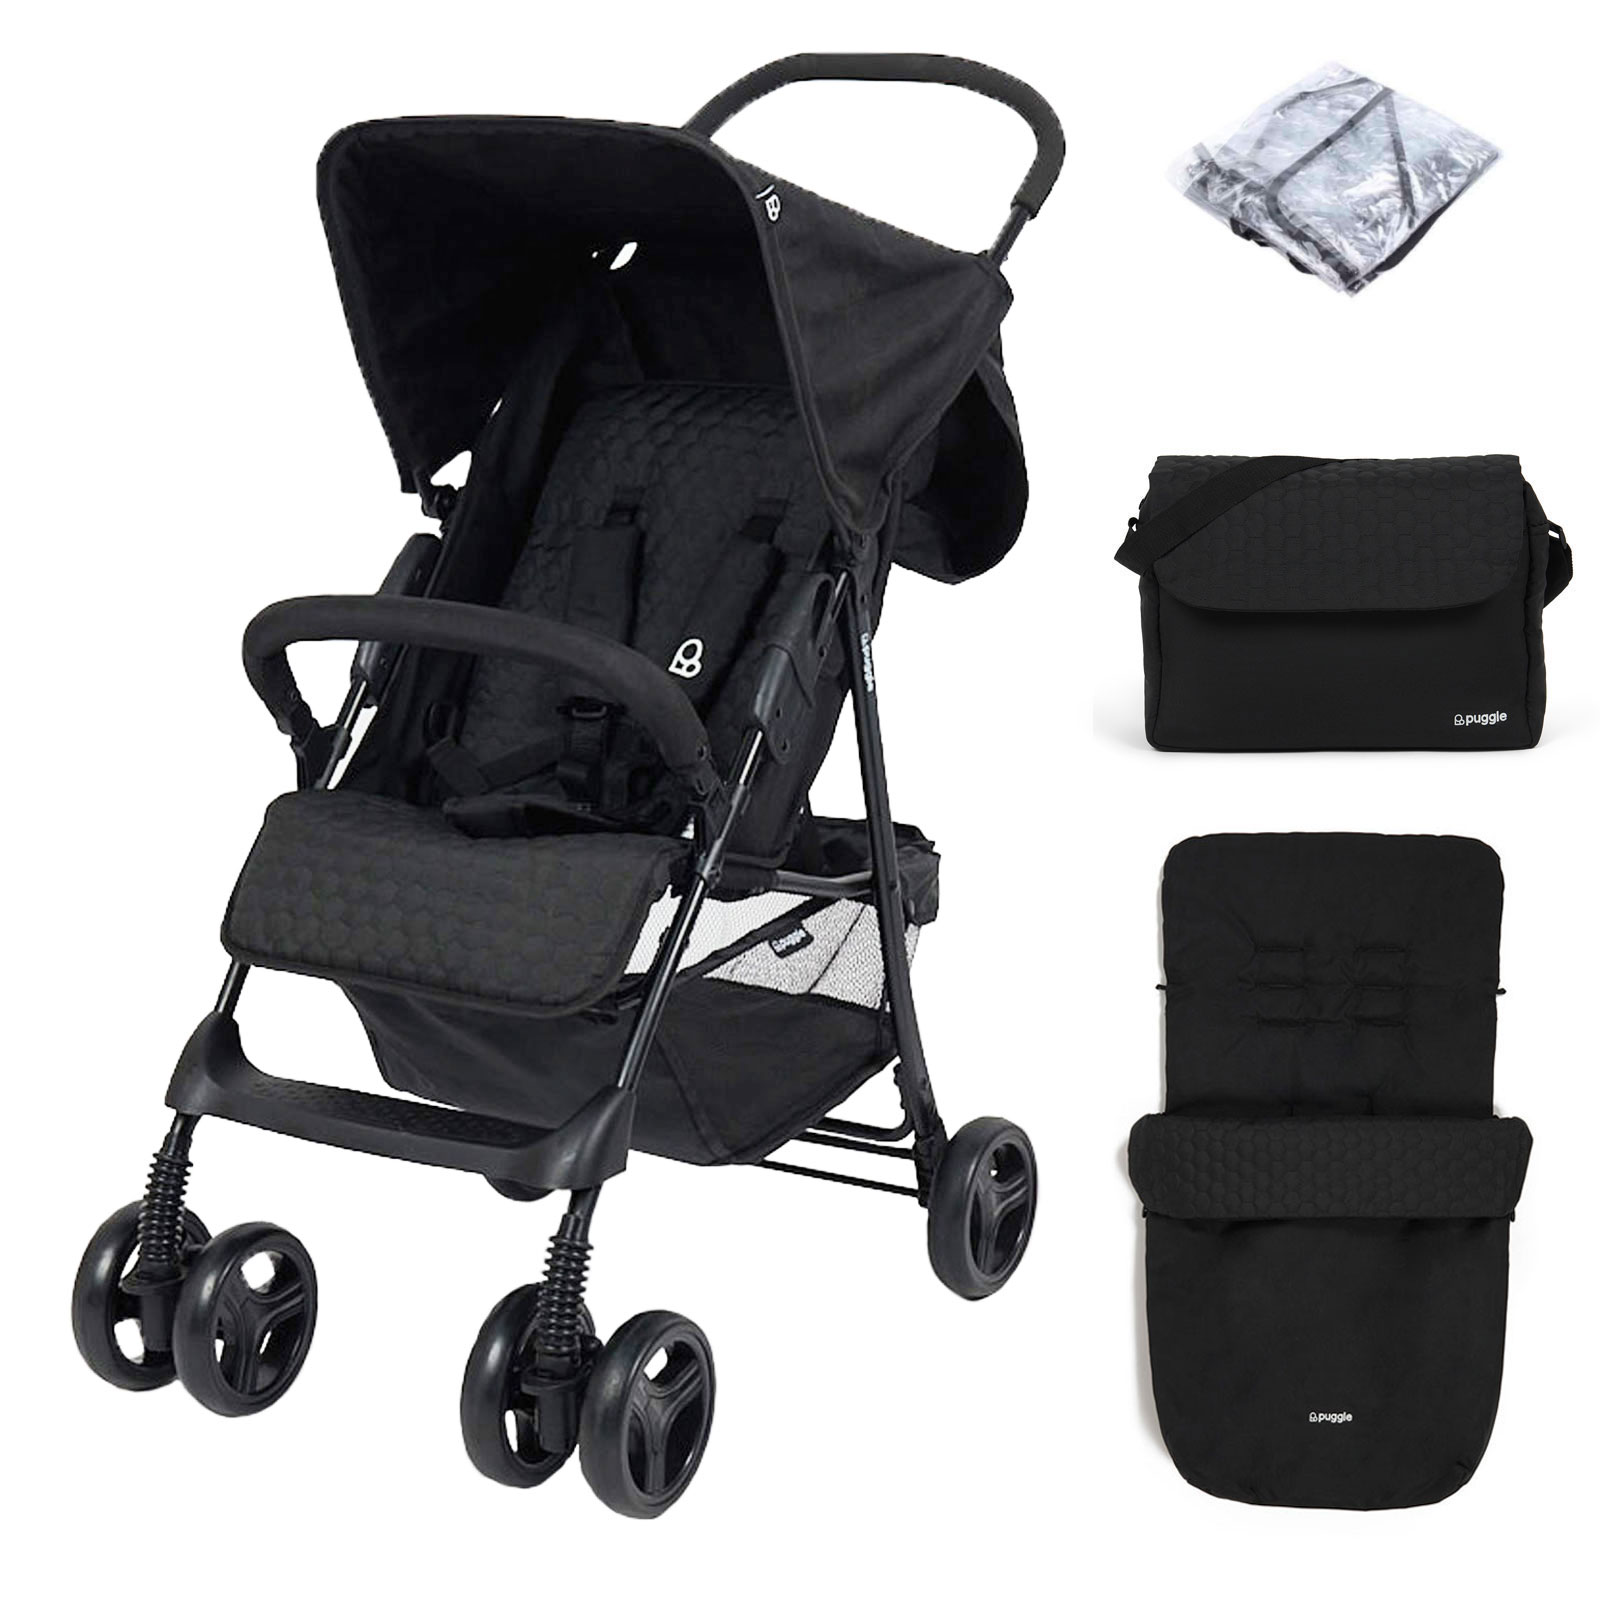 Puggle Holiday Luxe Pushchair Stroller with Raincover, Universal Footmuff, Changing Bag and Mat – Storm Black